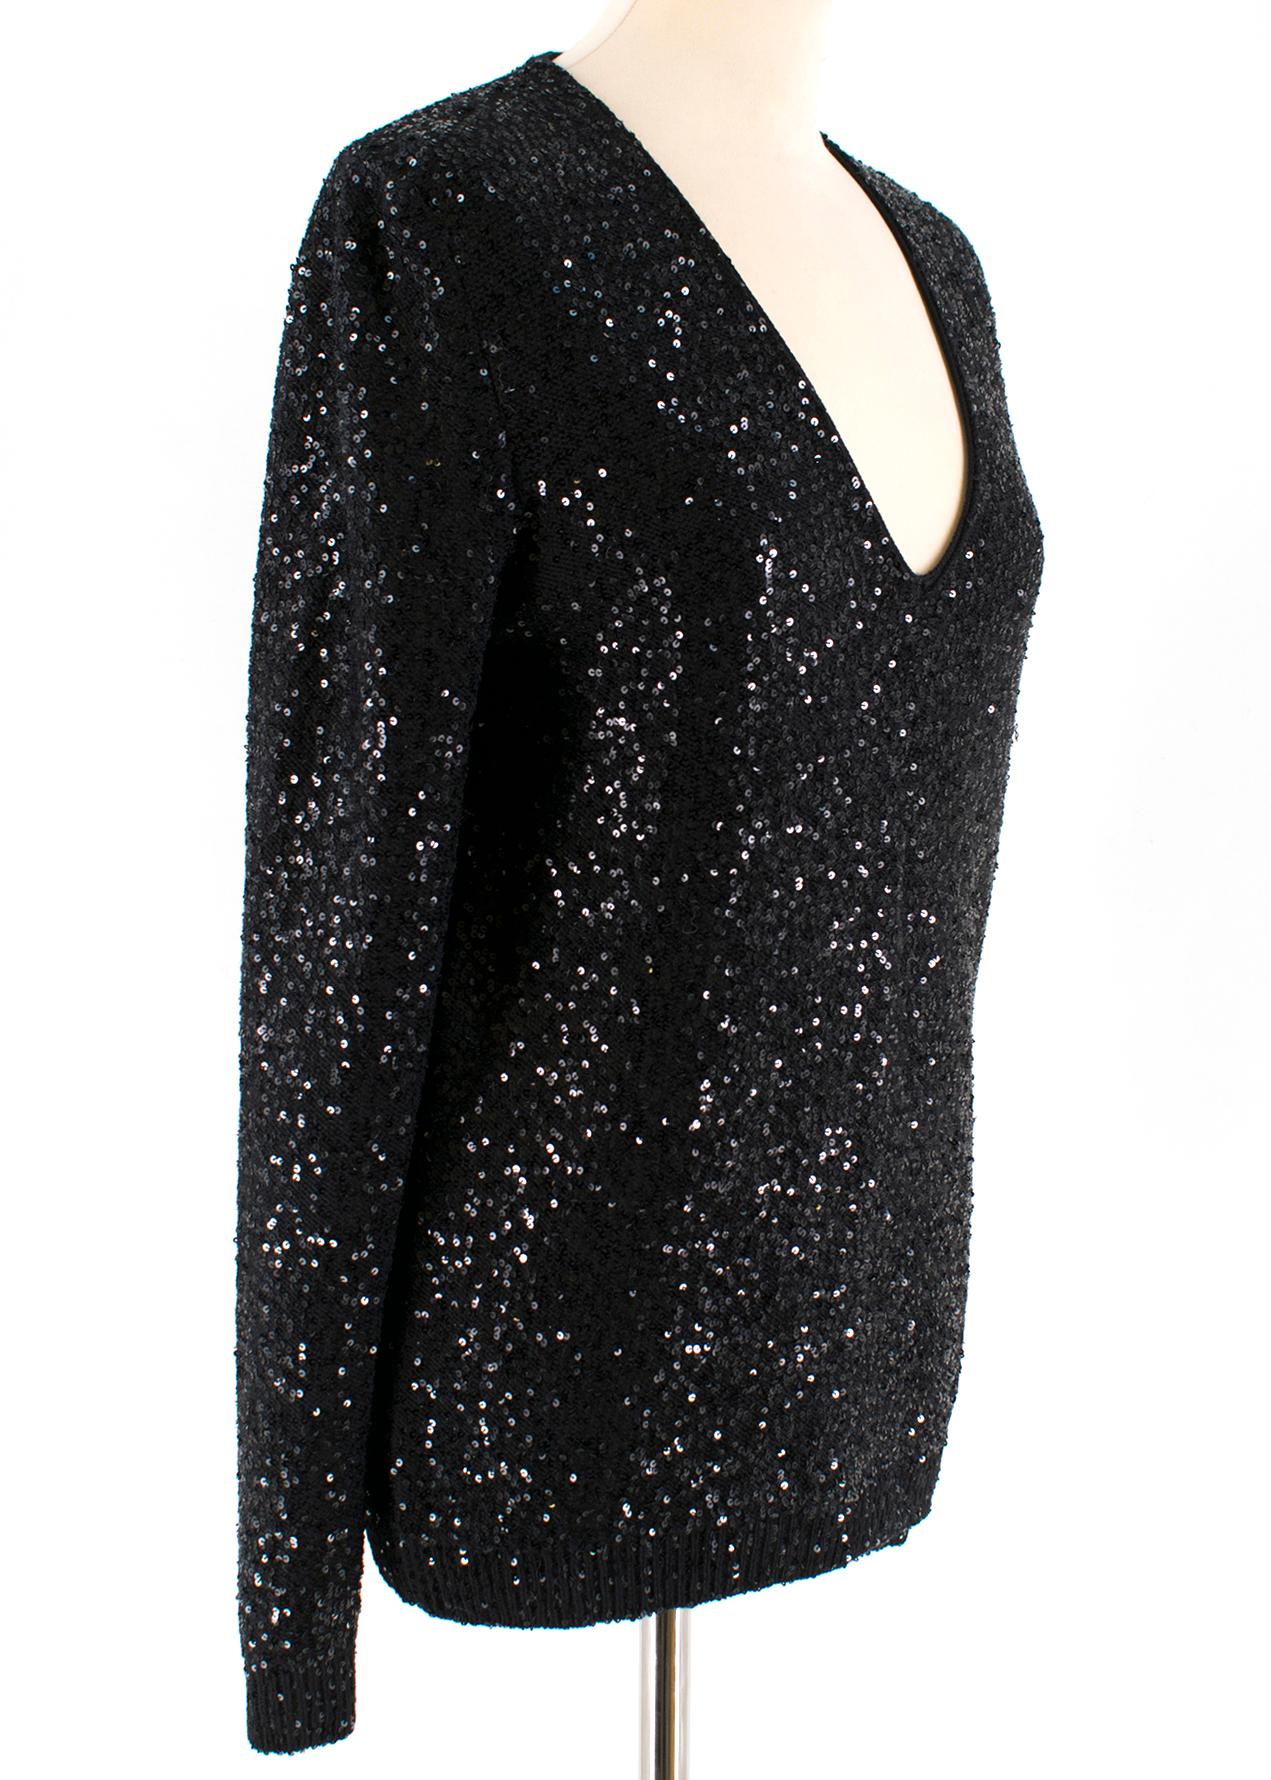 Yves Saint Laurent Black Sequin-Embellished Wool Sweater

Black Sequin knitted jumper
Long sleeves 
Low cut V-neck 
Ribbed hem and cuffs
Heavy weight wool knit

 Please note, these items are pre-owned and may show some signs of storage, even when